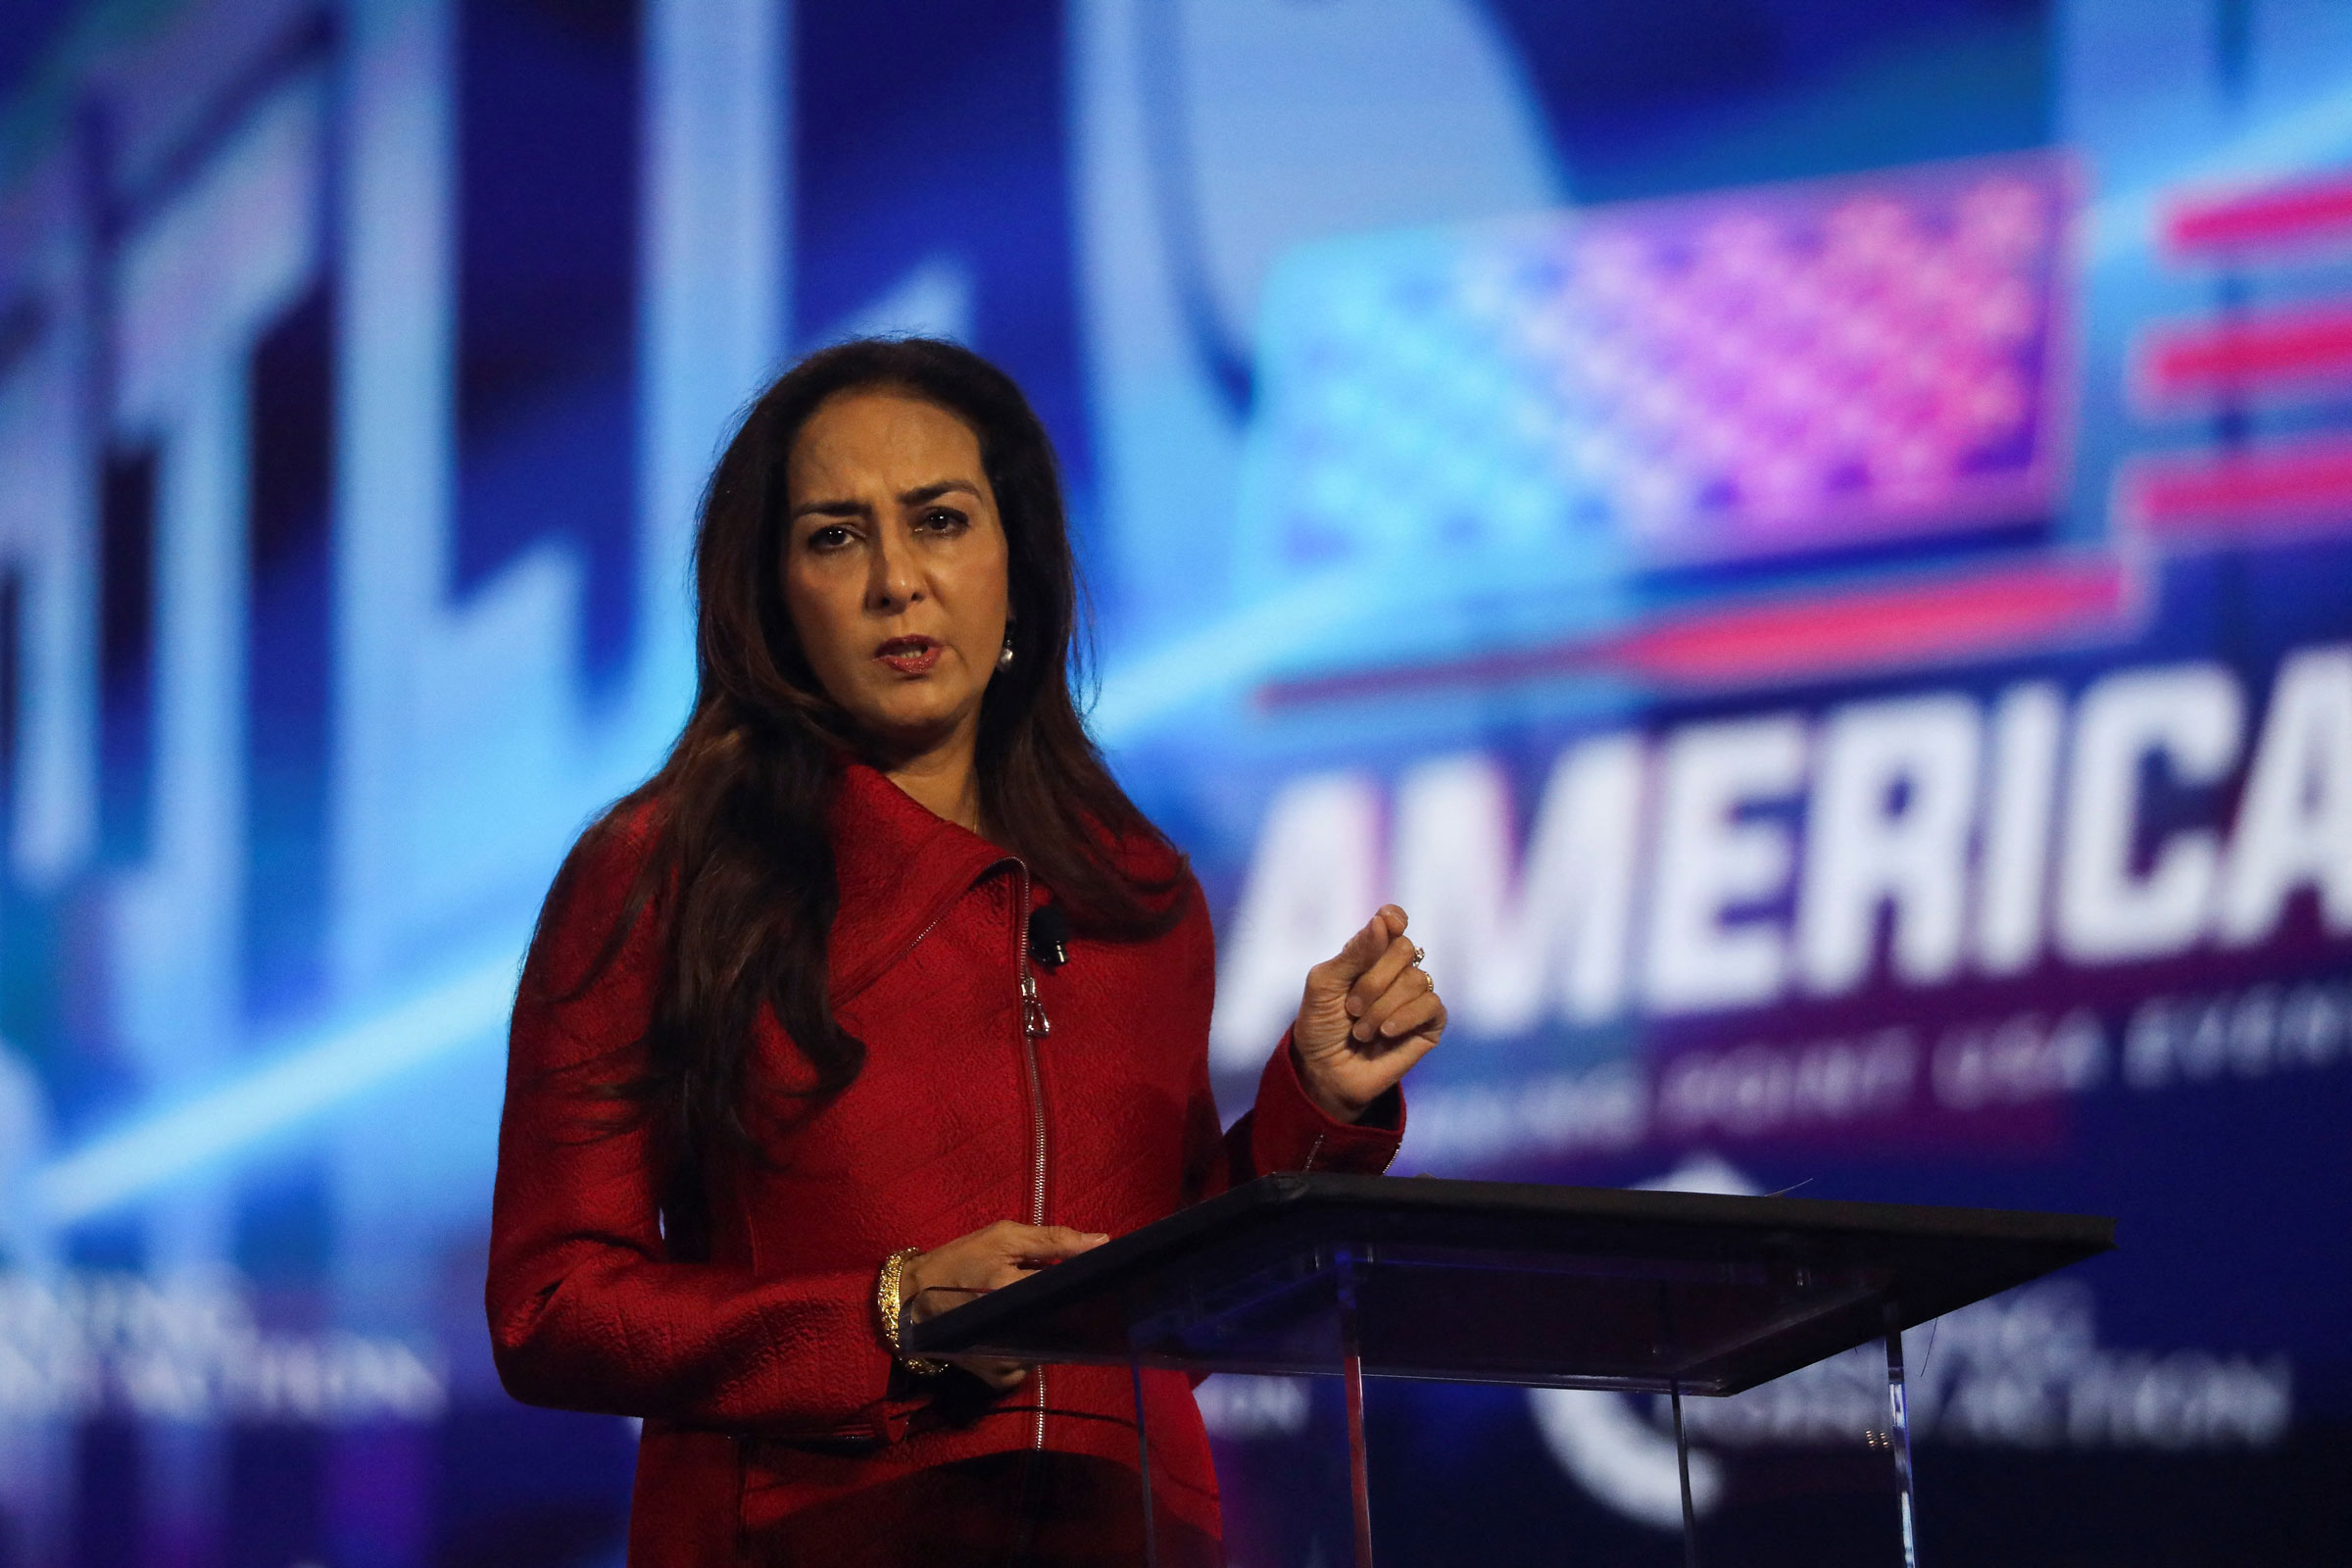 Attorney Harmeet Dhillon, a candidate for chairperson of the Republican National Committee, speaks during a right-wing gathering known as America Fest, an event organised by Turning Point USA, in Phoenix, Ariz., on Dec. 20, 2022. (Jim Urquhart—Reuters)